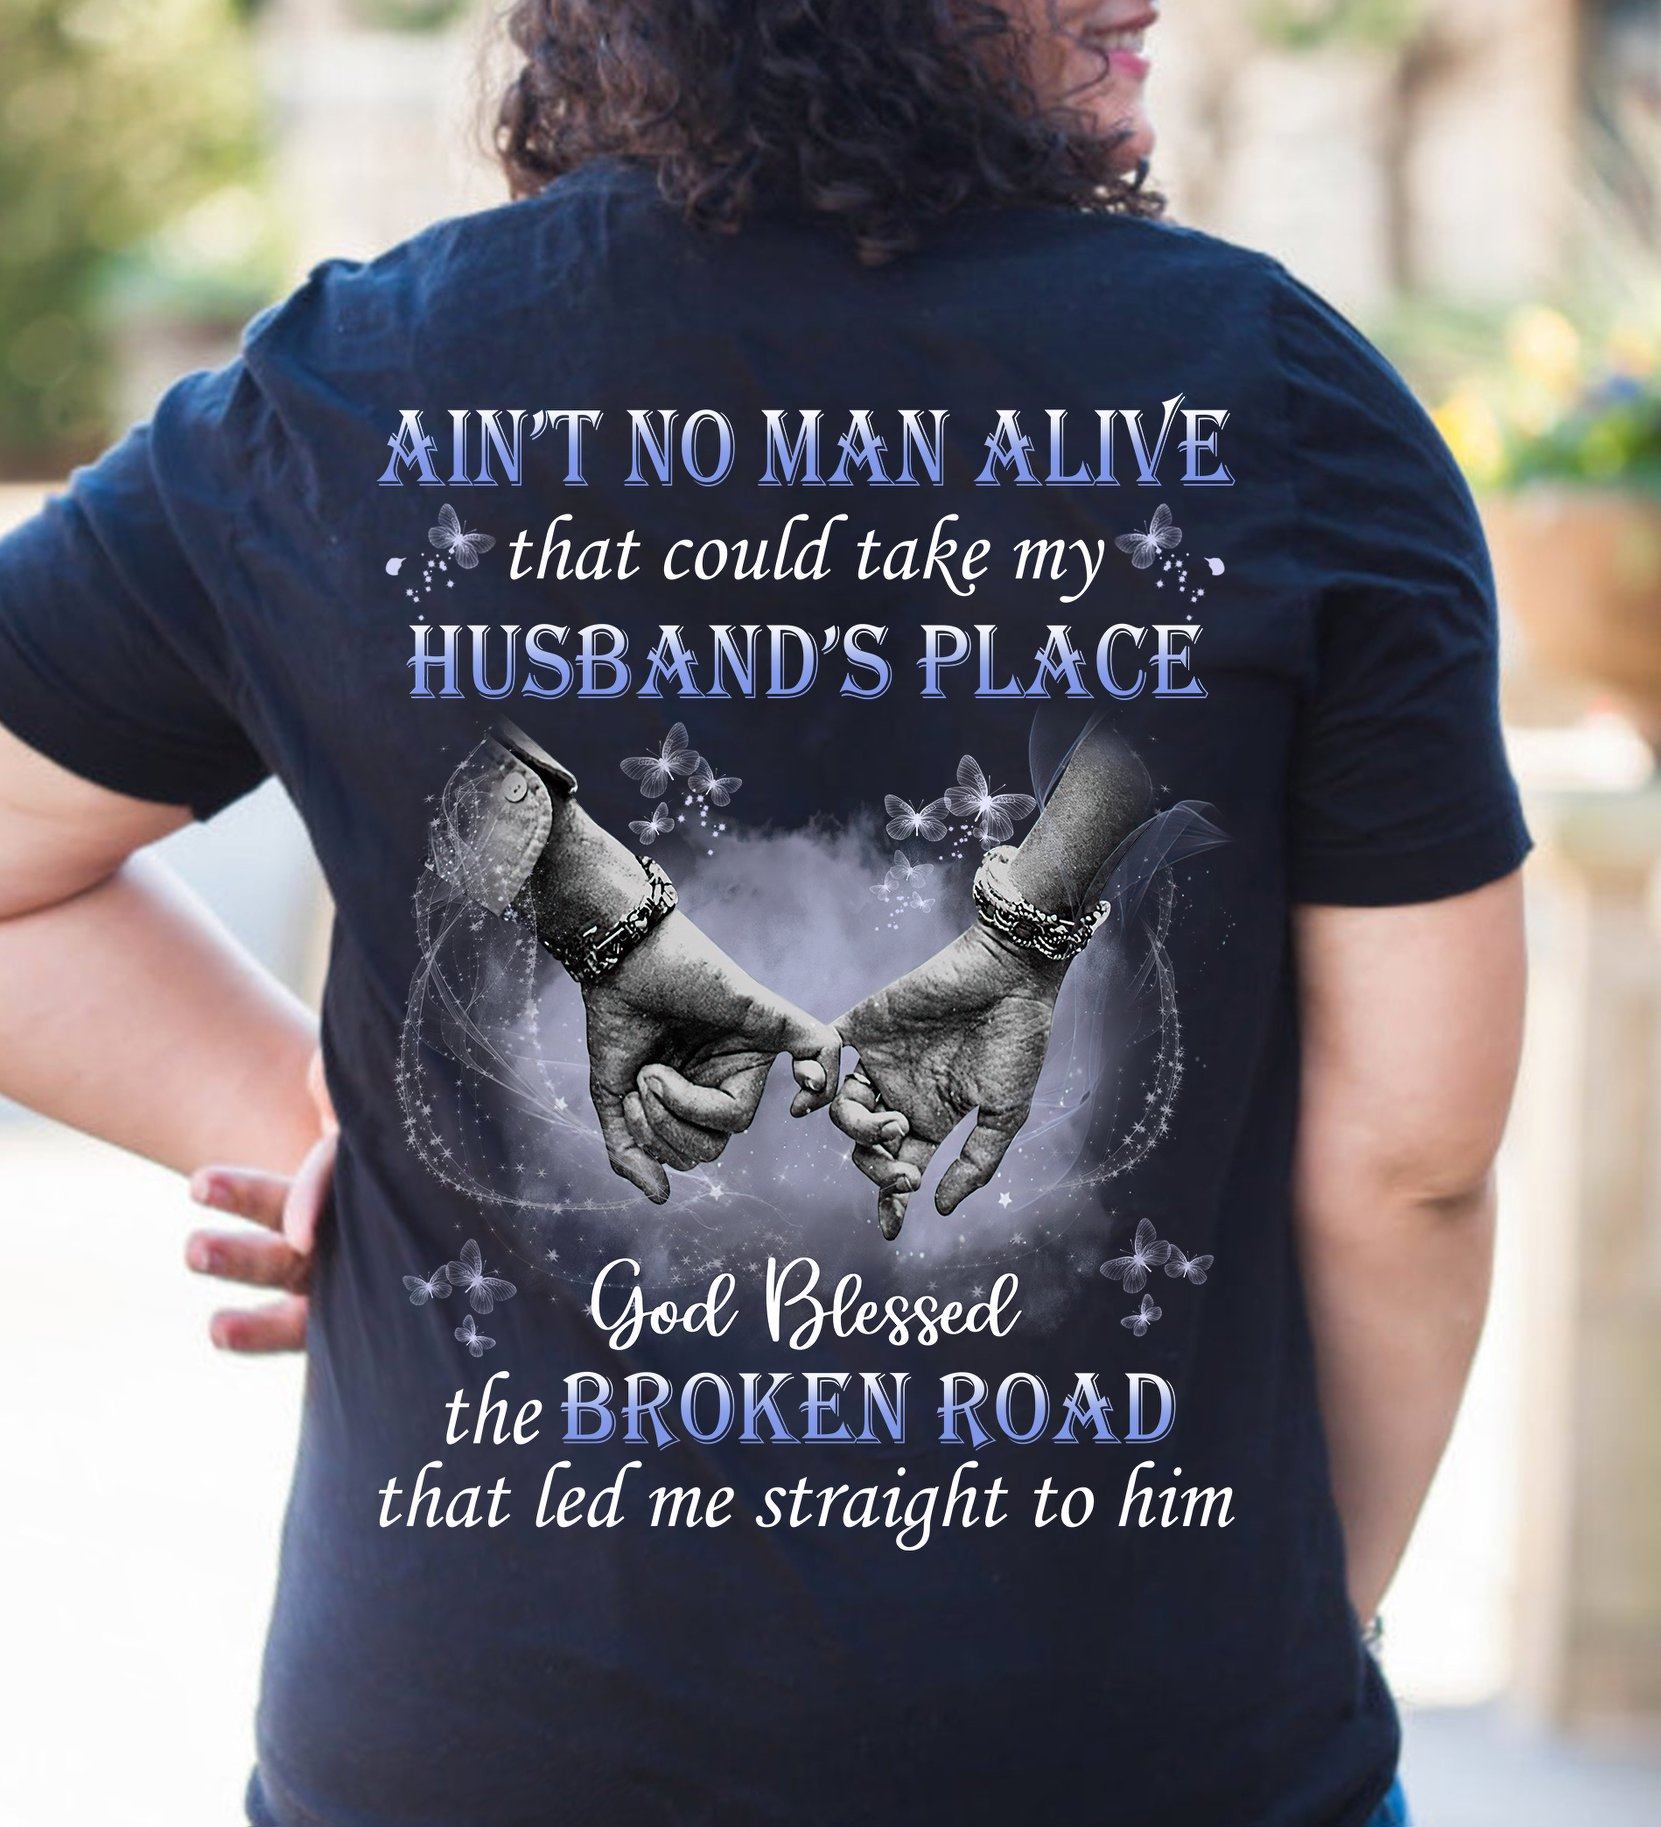 Ain't no man alive that could take my husband's place god blessed the broken road - Husband and wife